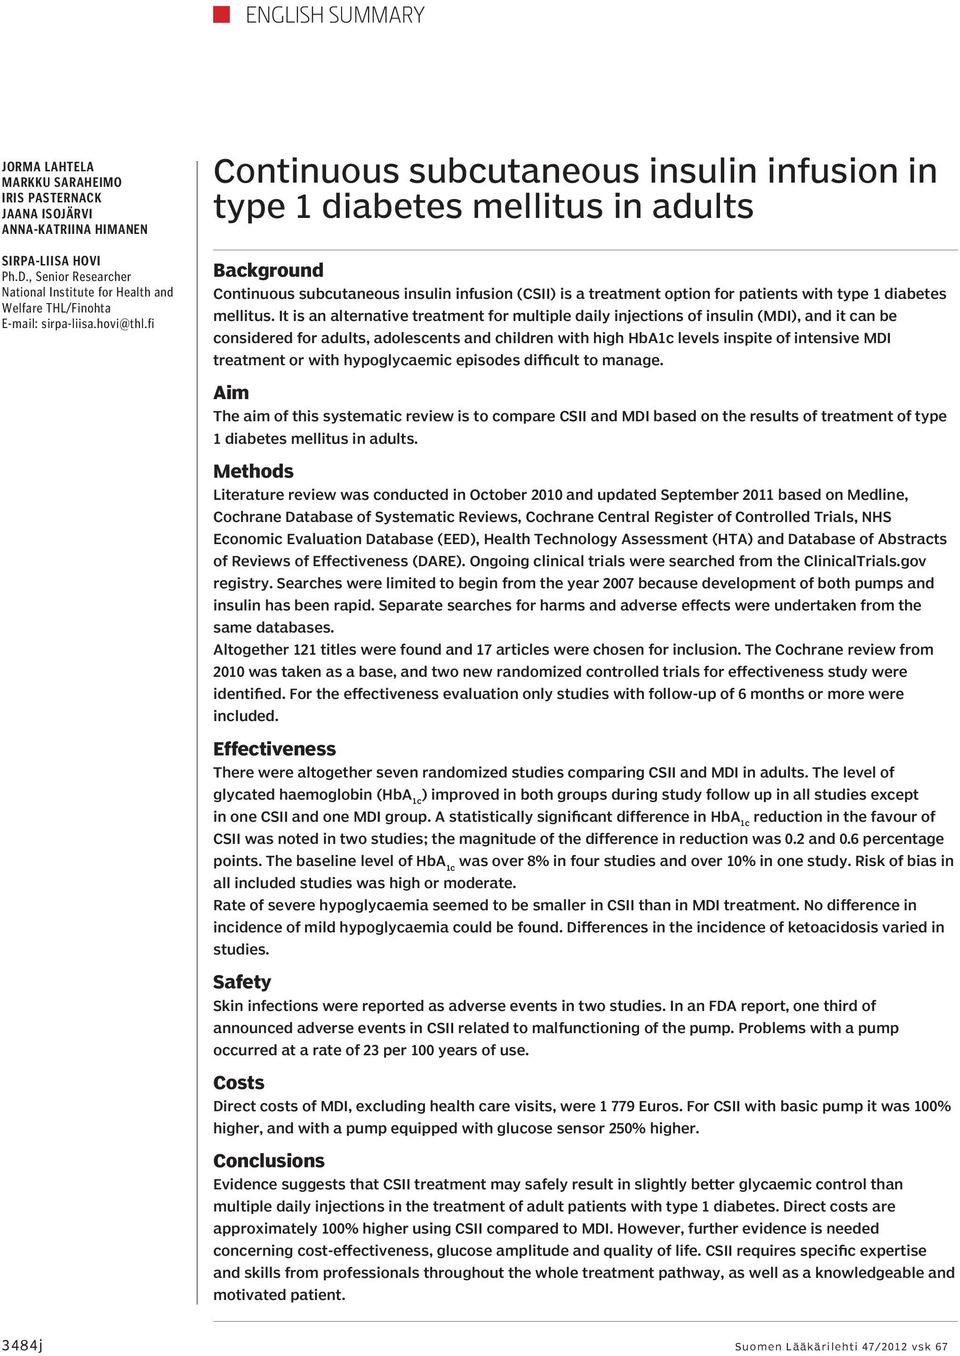 fi Continuous subcutaneous insulin infusion in type 1 diabetes mellitus in adults Background Continuous subcutaneous insulin infusion (CSII) is a treatment option for patients with type 1 diabetes